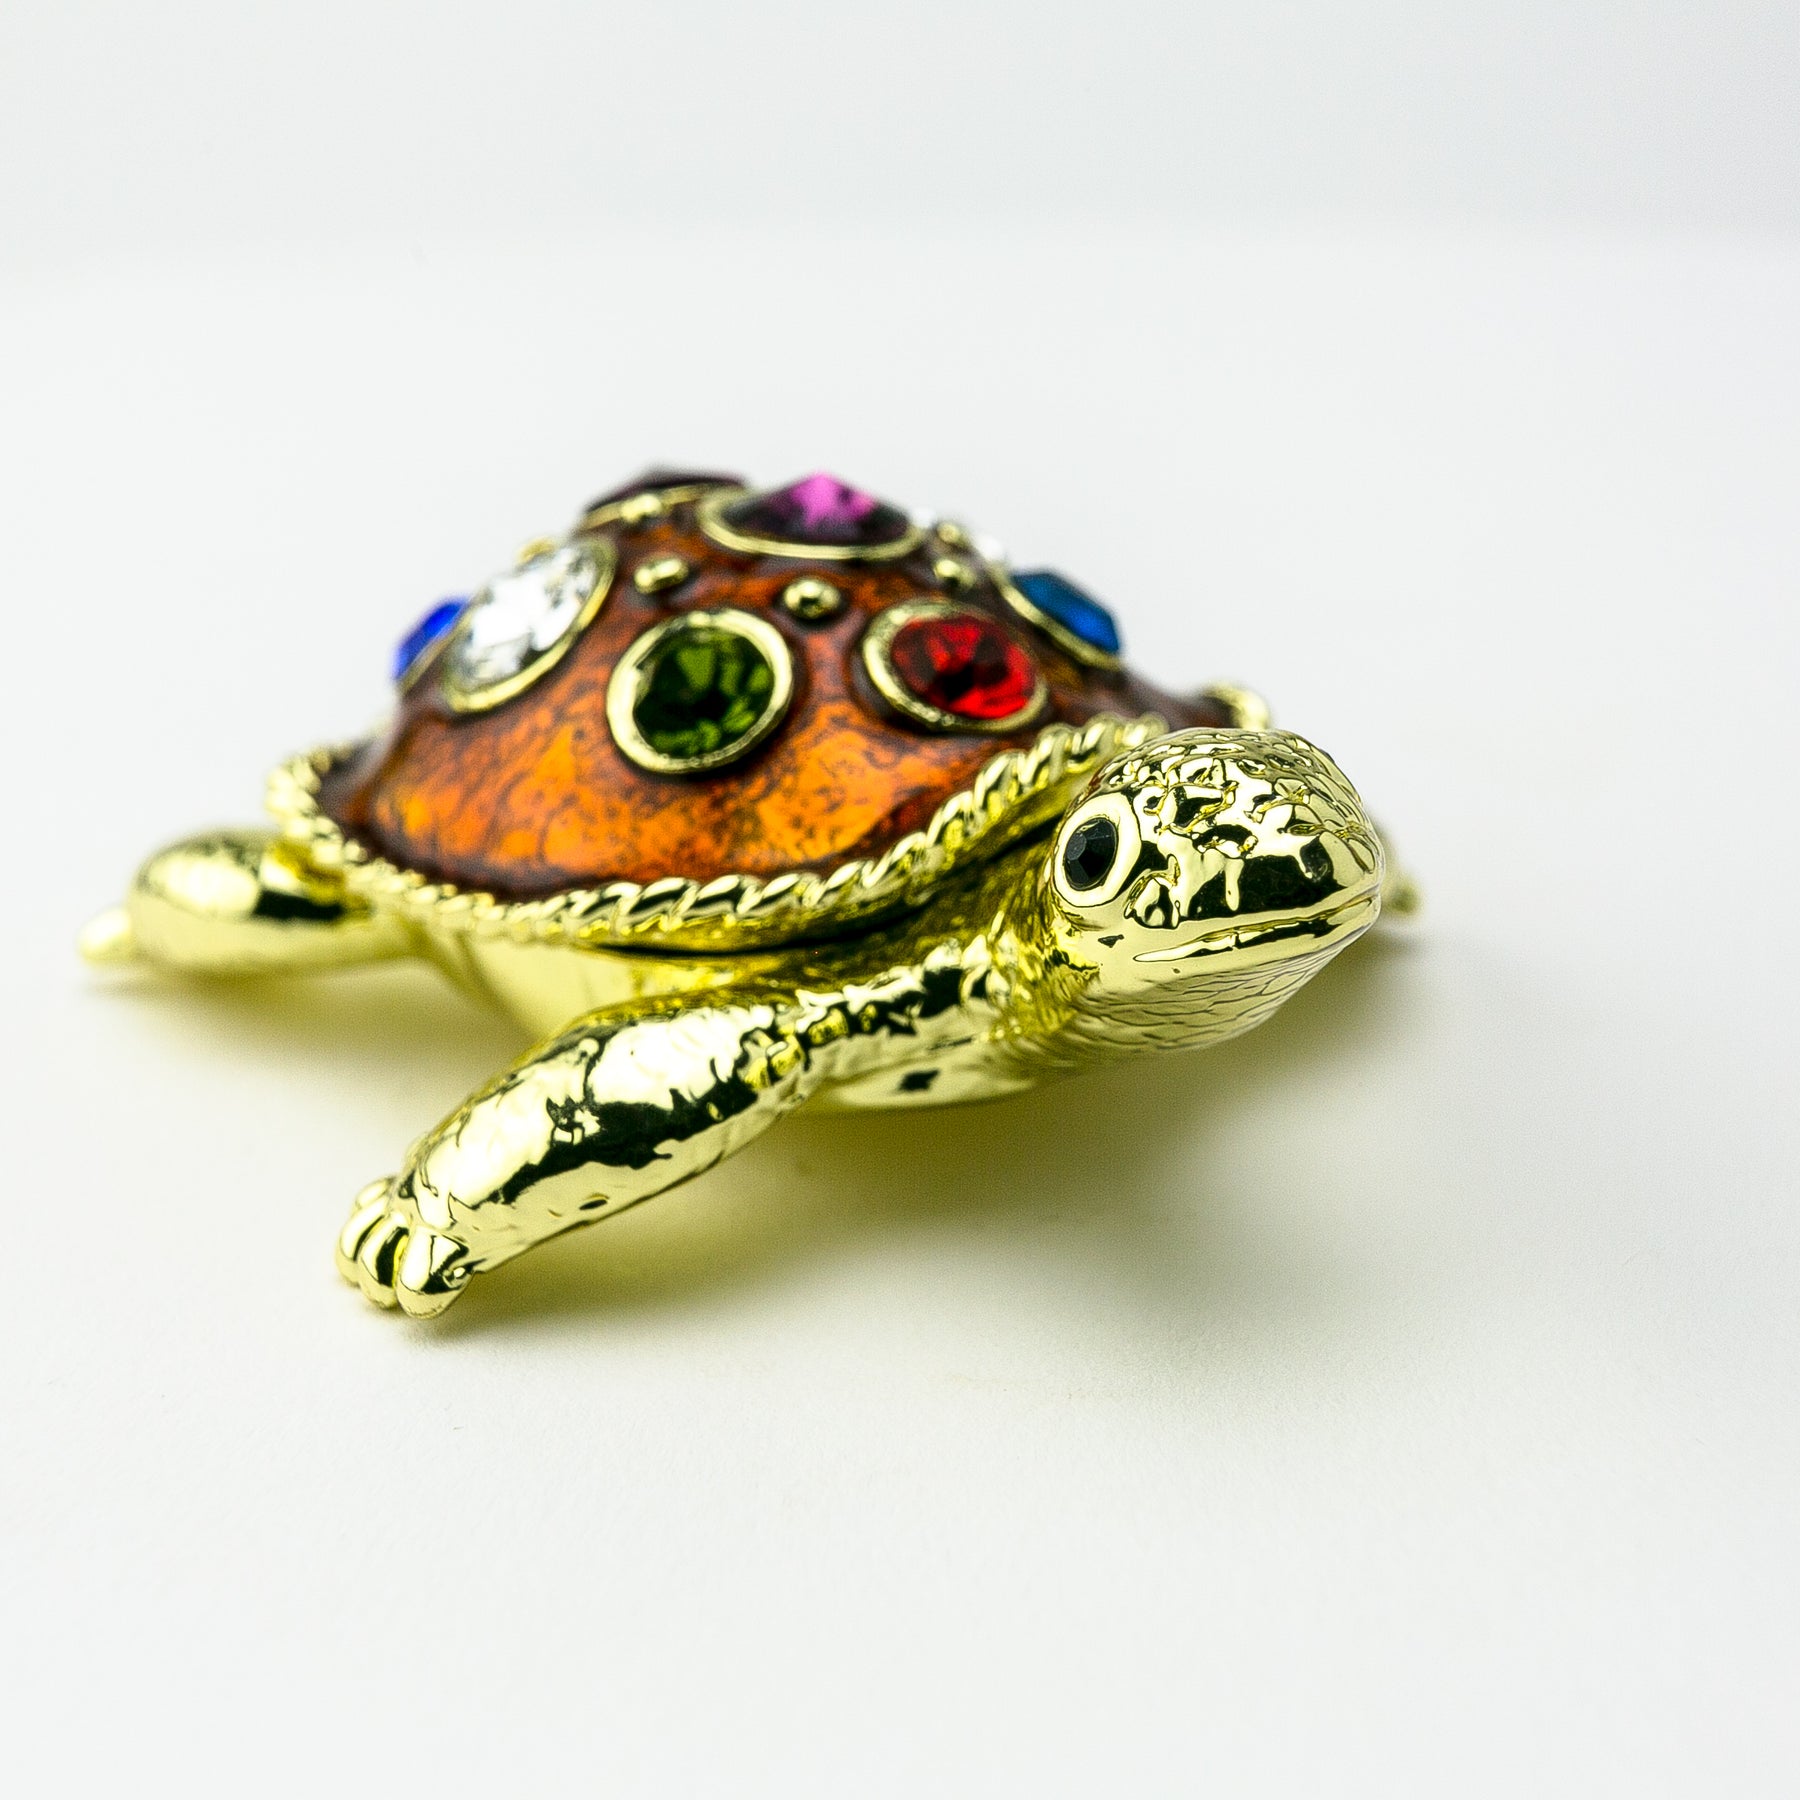 Golden Turtle Decorated with Colorful Crystals